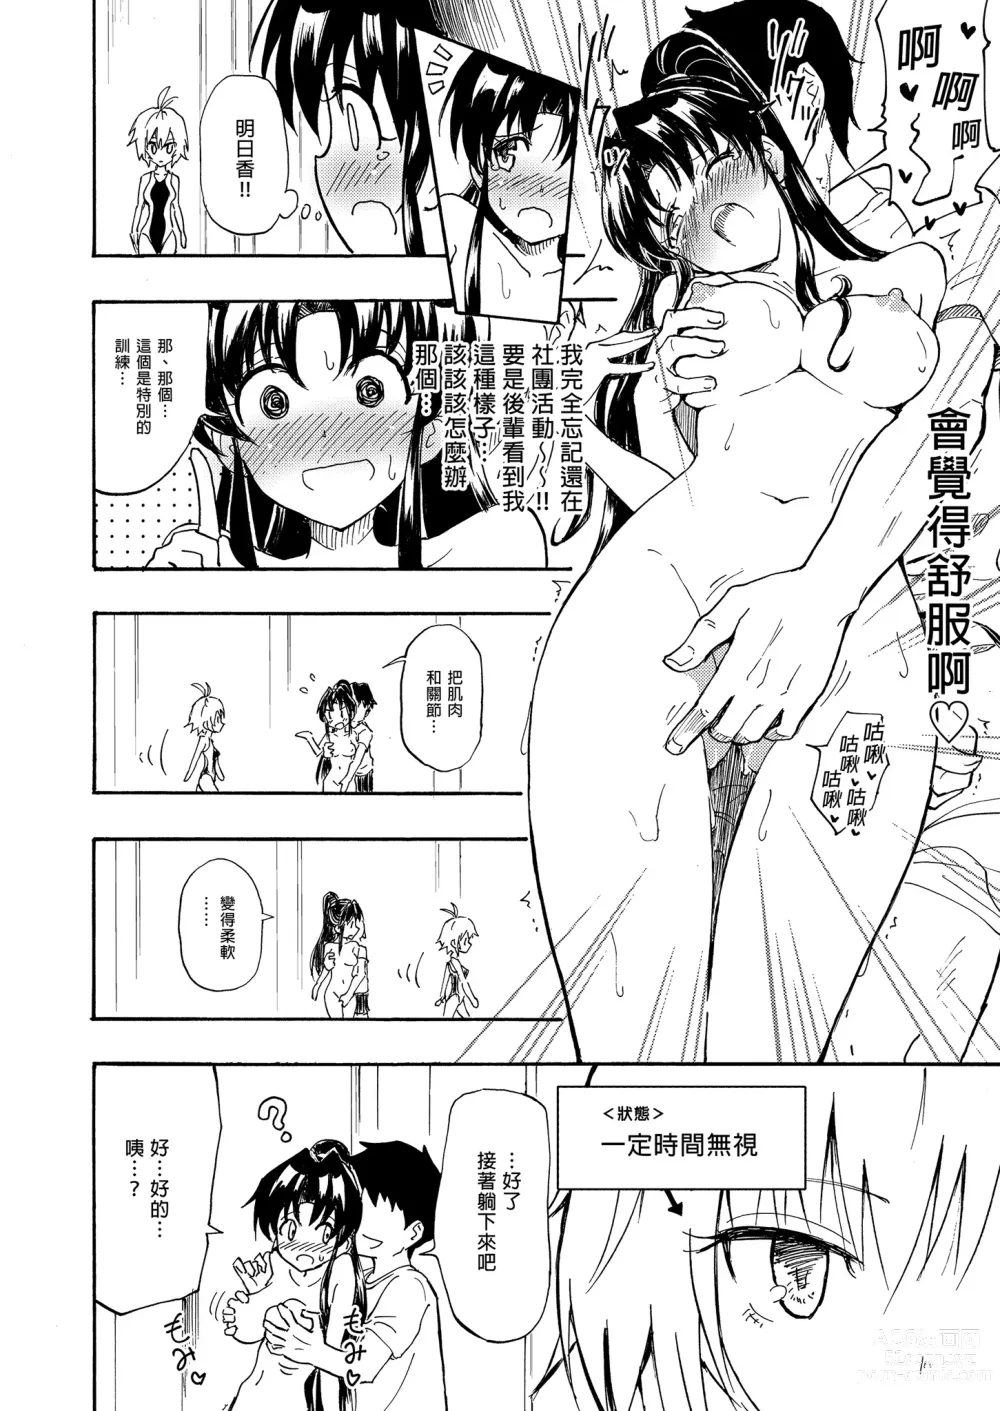 Page 20 of doujinshi _セックススマートフォン～ハーレム学園編総集編～